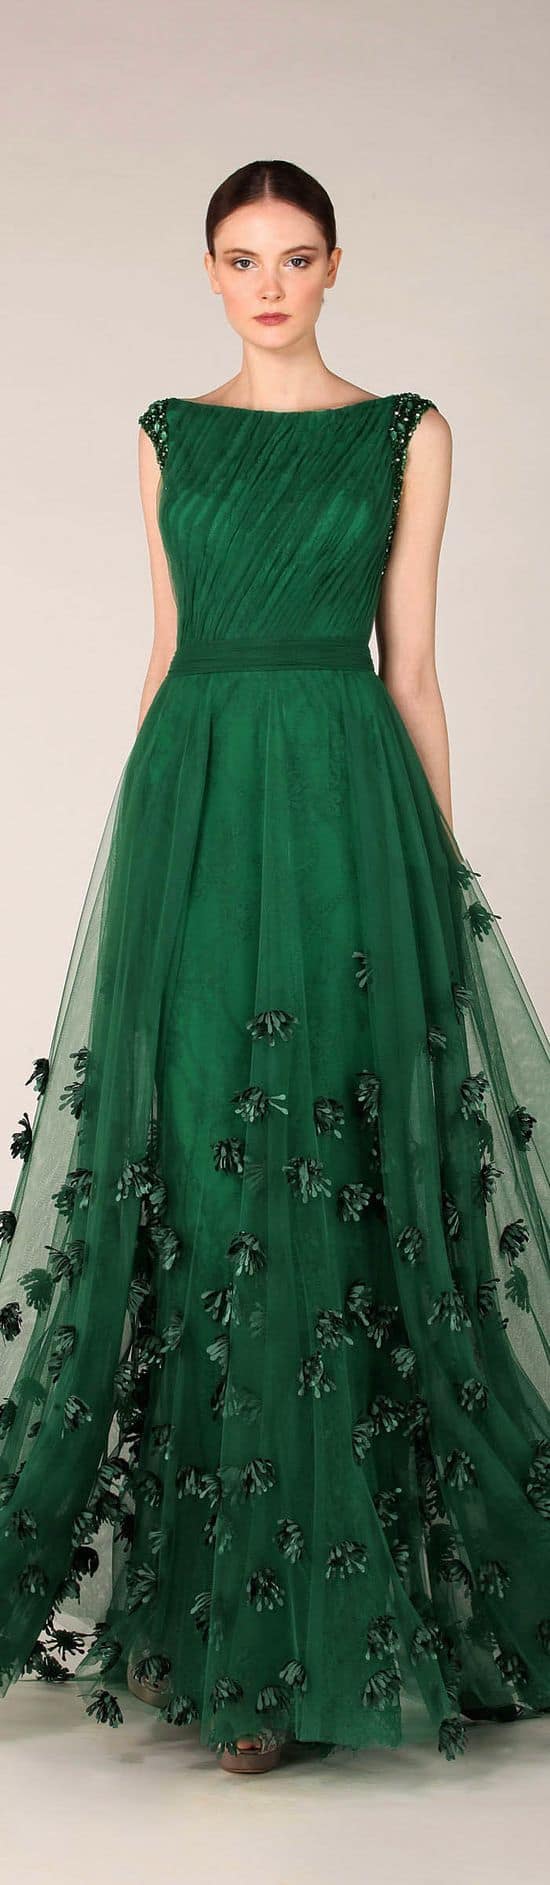 outfit with forest green evening dress